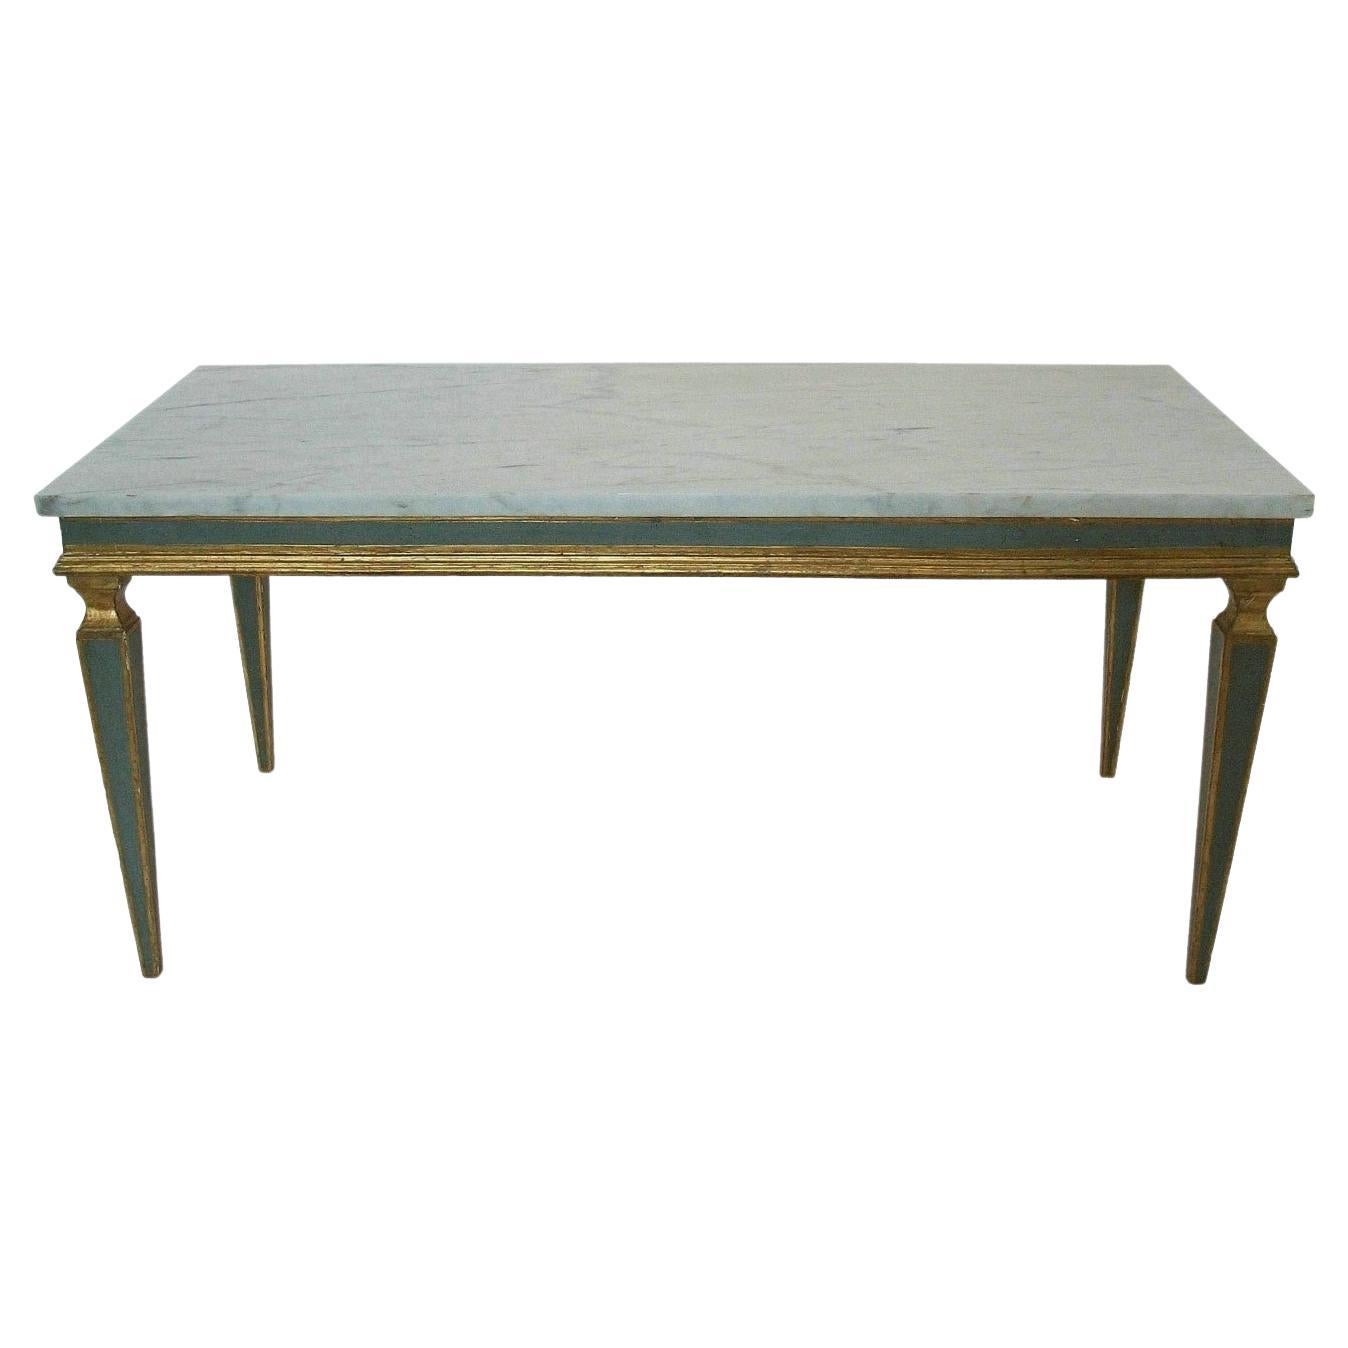 Venetian Gray Painted & Parcel Gilt Coffee Table - Marble Top - Mid 20th Century For Sale